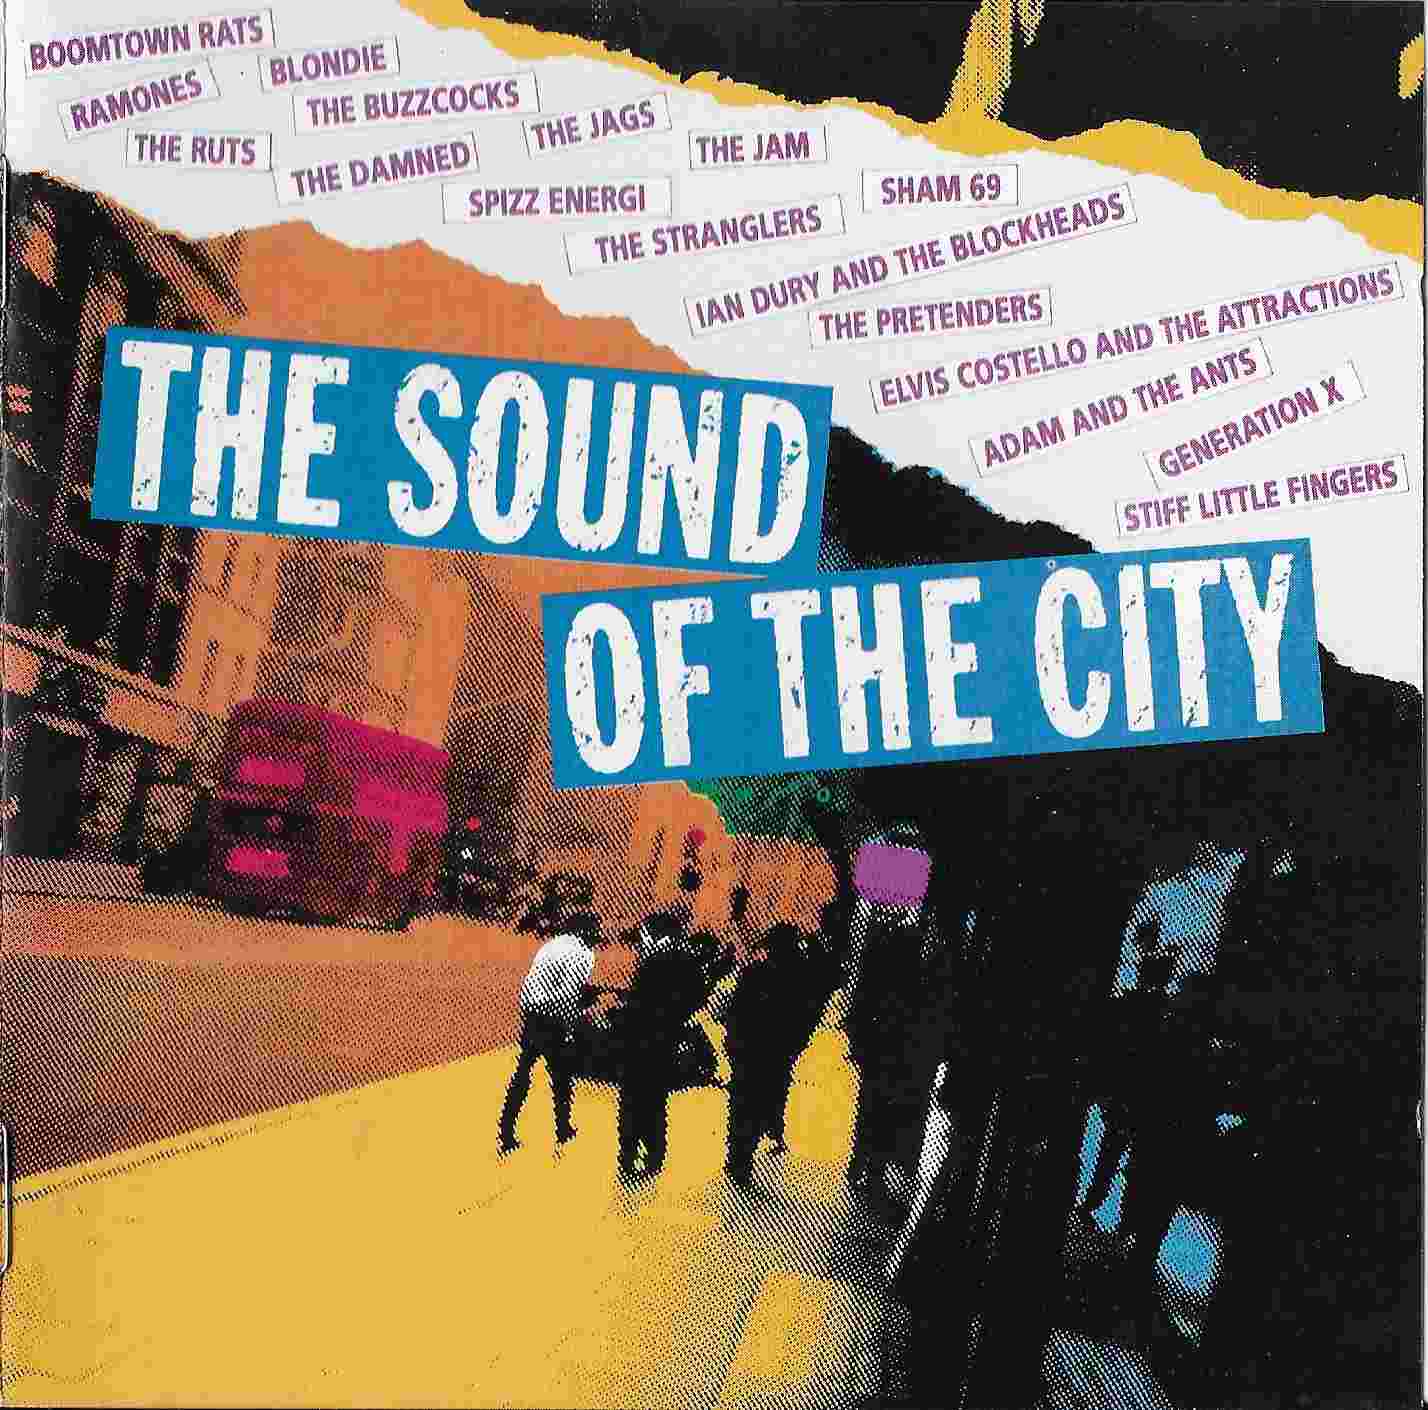 Picture of The sound of the city by artist Various 